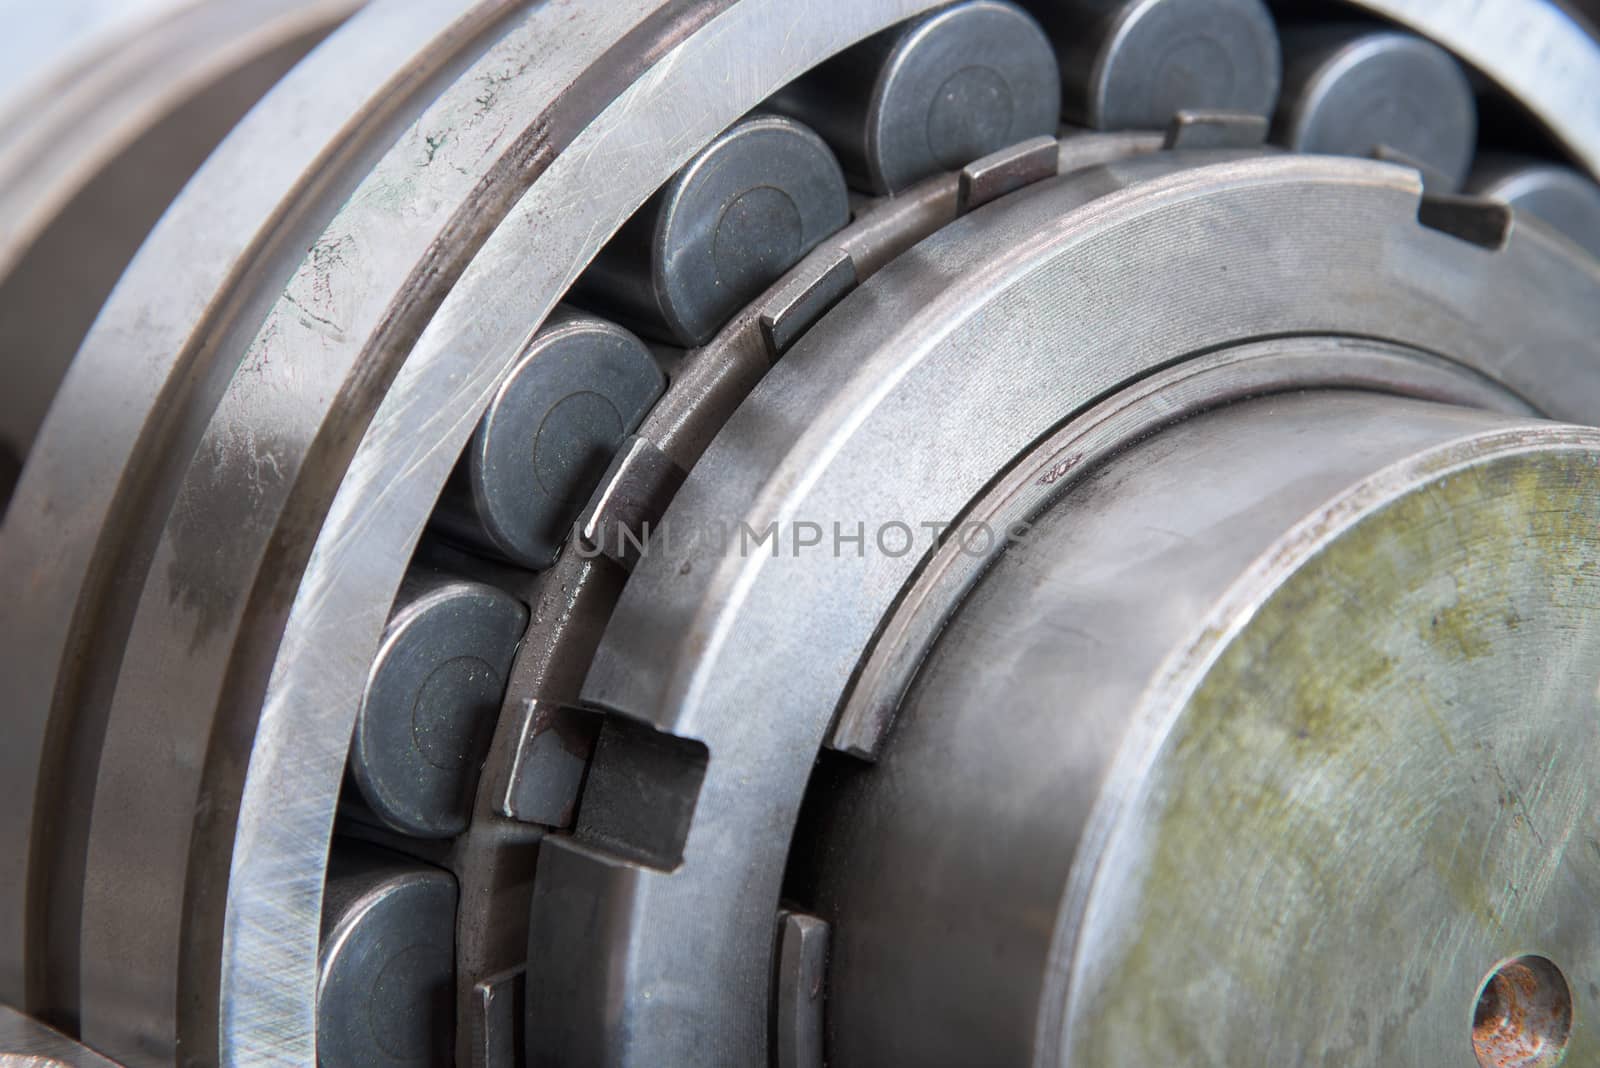 Stainless roller bearing on industrial size drive shaft. Shallow depth of field with only parts of the bearing in focus.